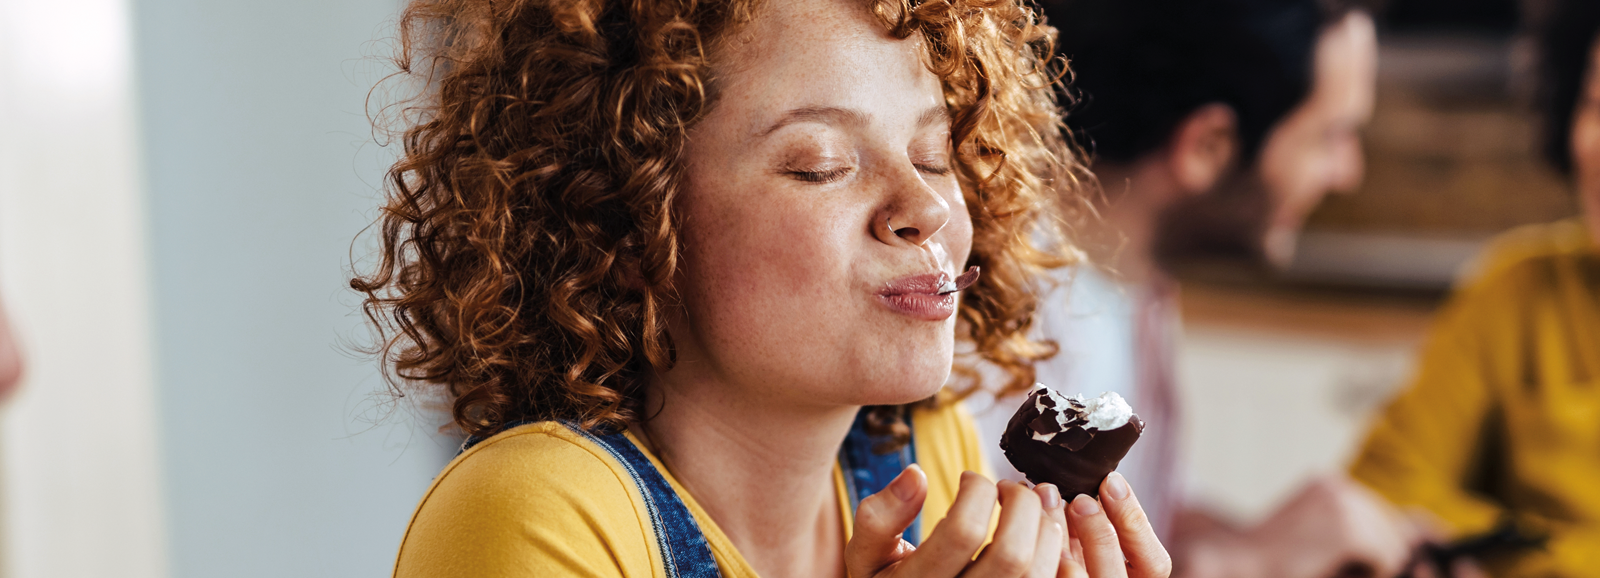 woman-eating-ice-cream-1600x578.png